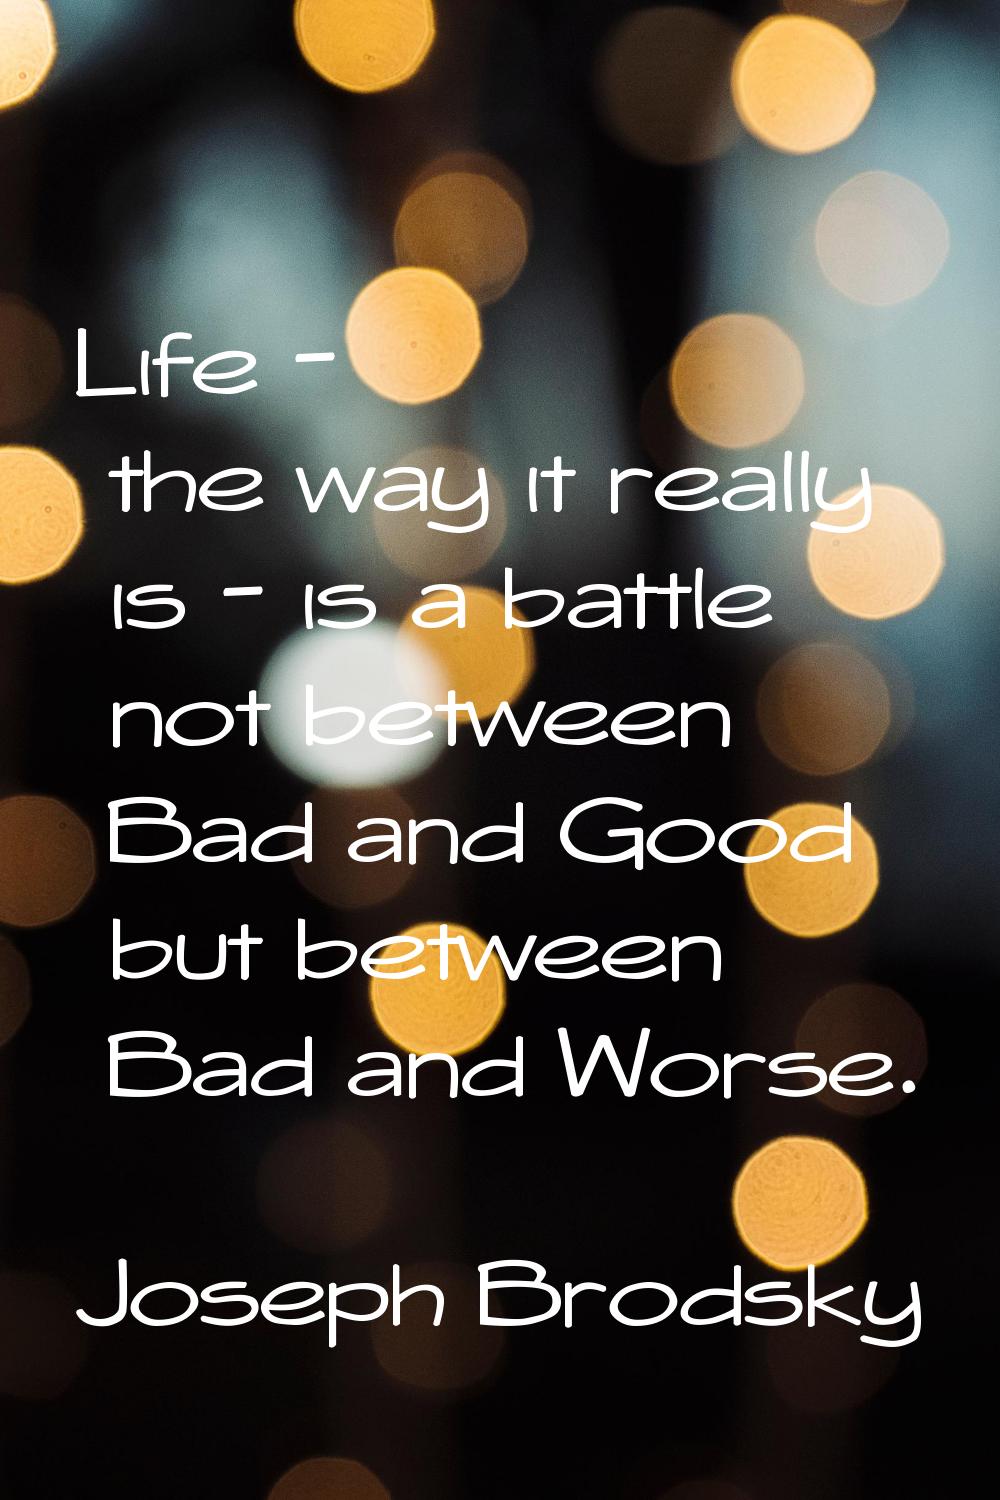 Life - the way it really is - is a battle not between Bad and Good but between Bad and Worse.